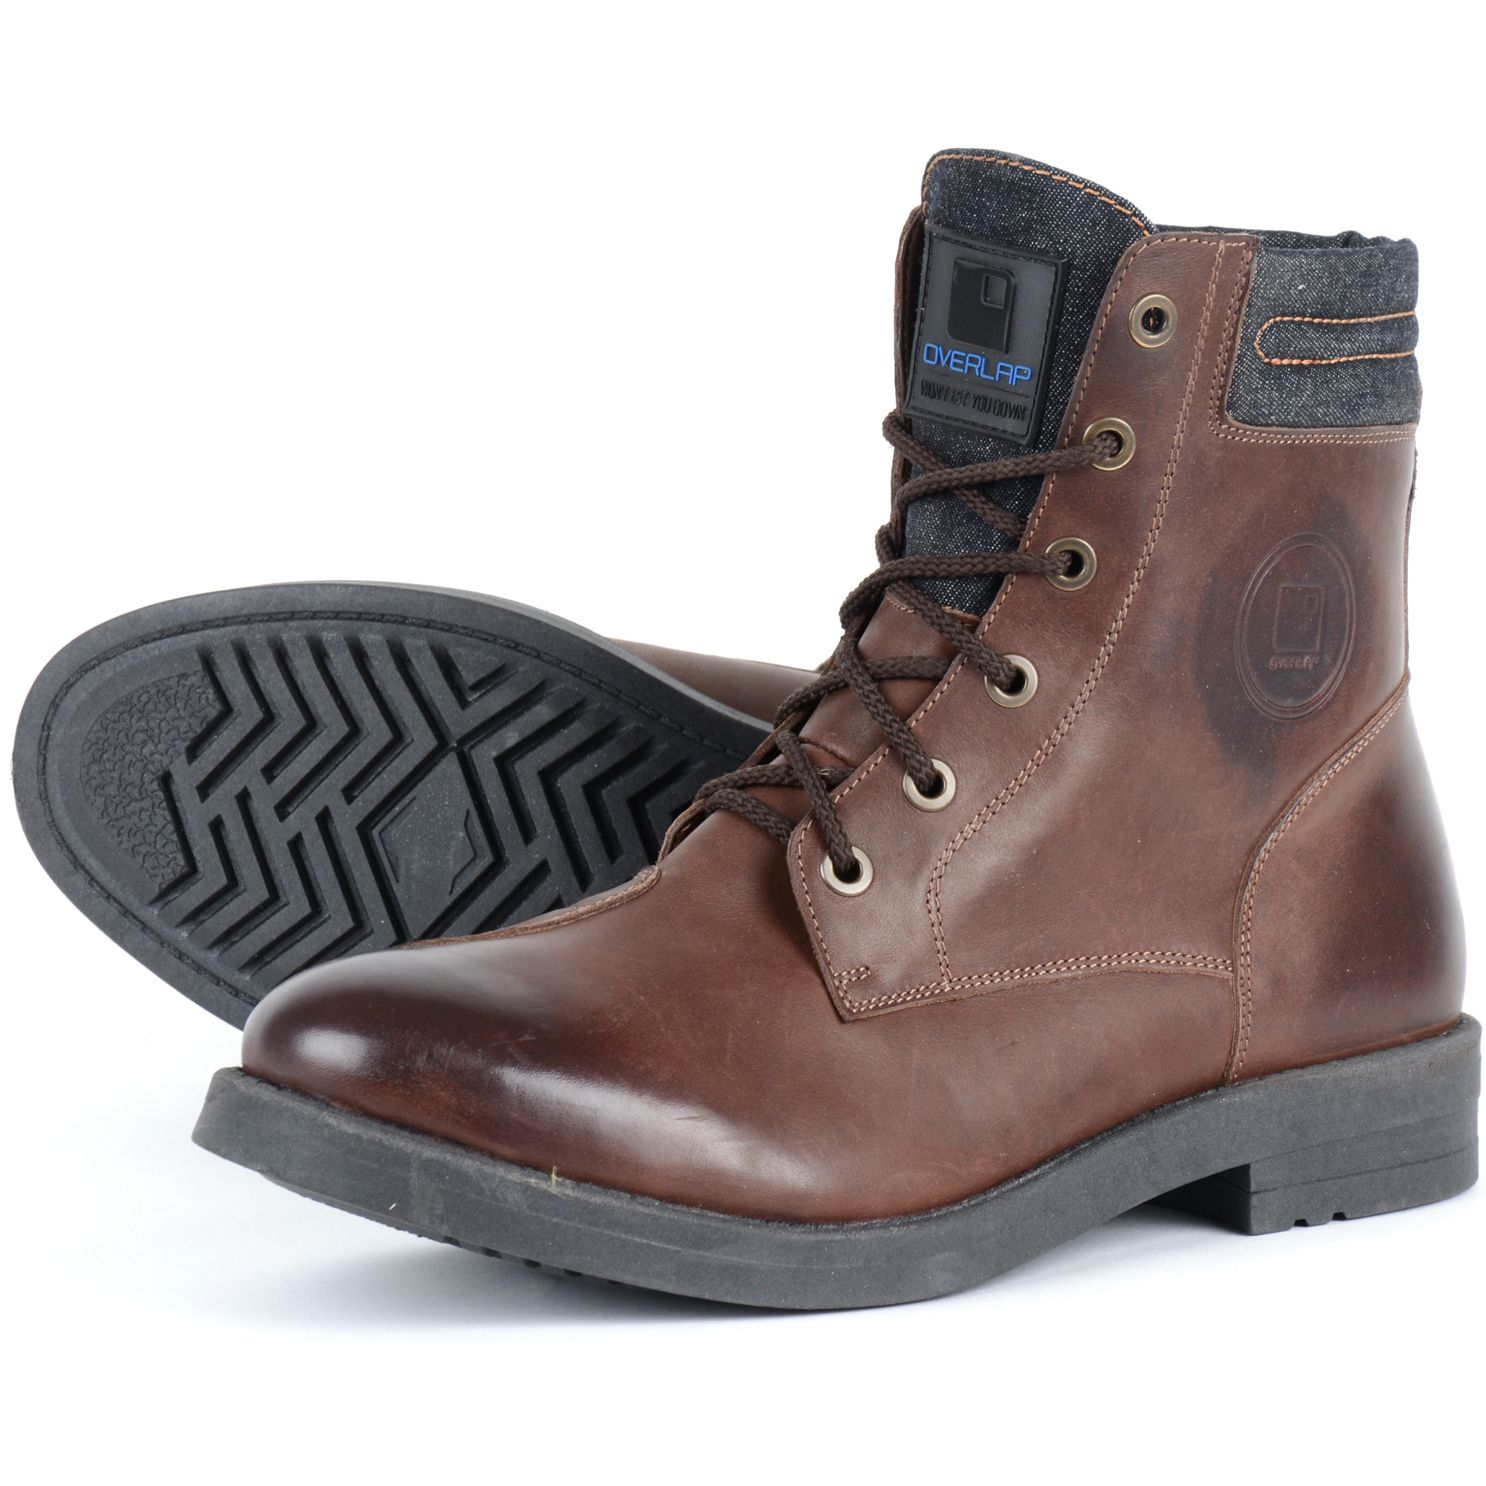 Chaussures Overlap Ovp-23